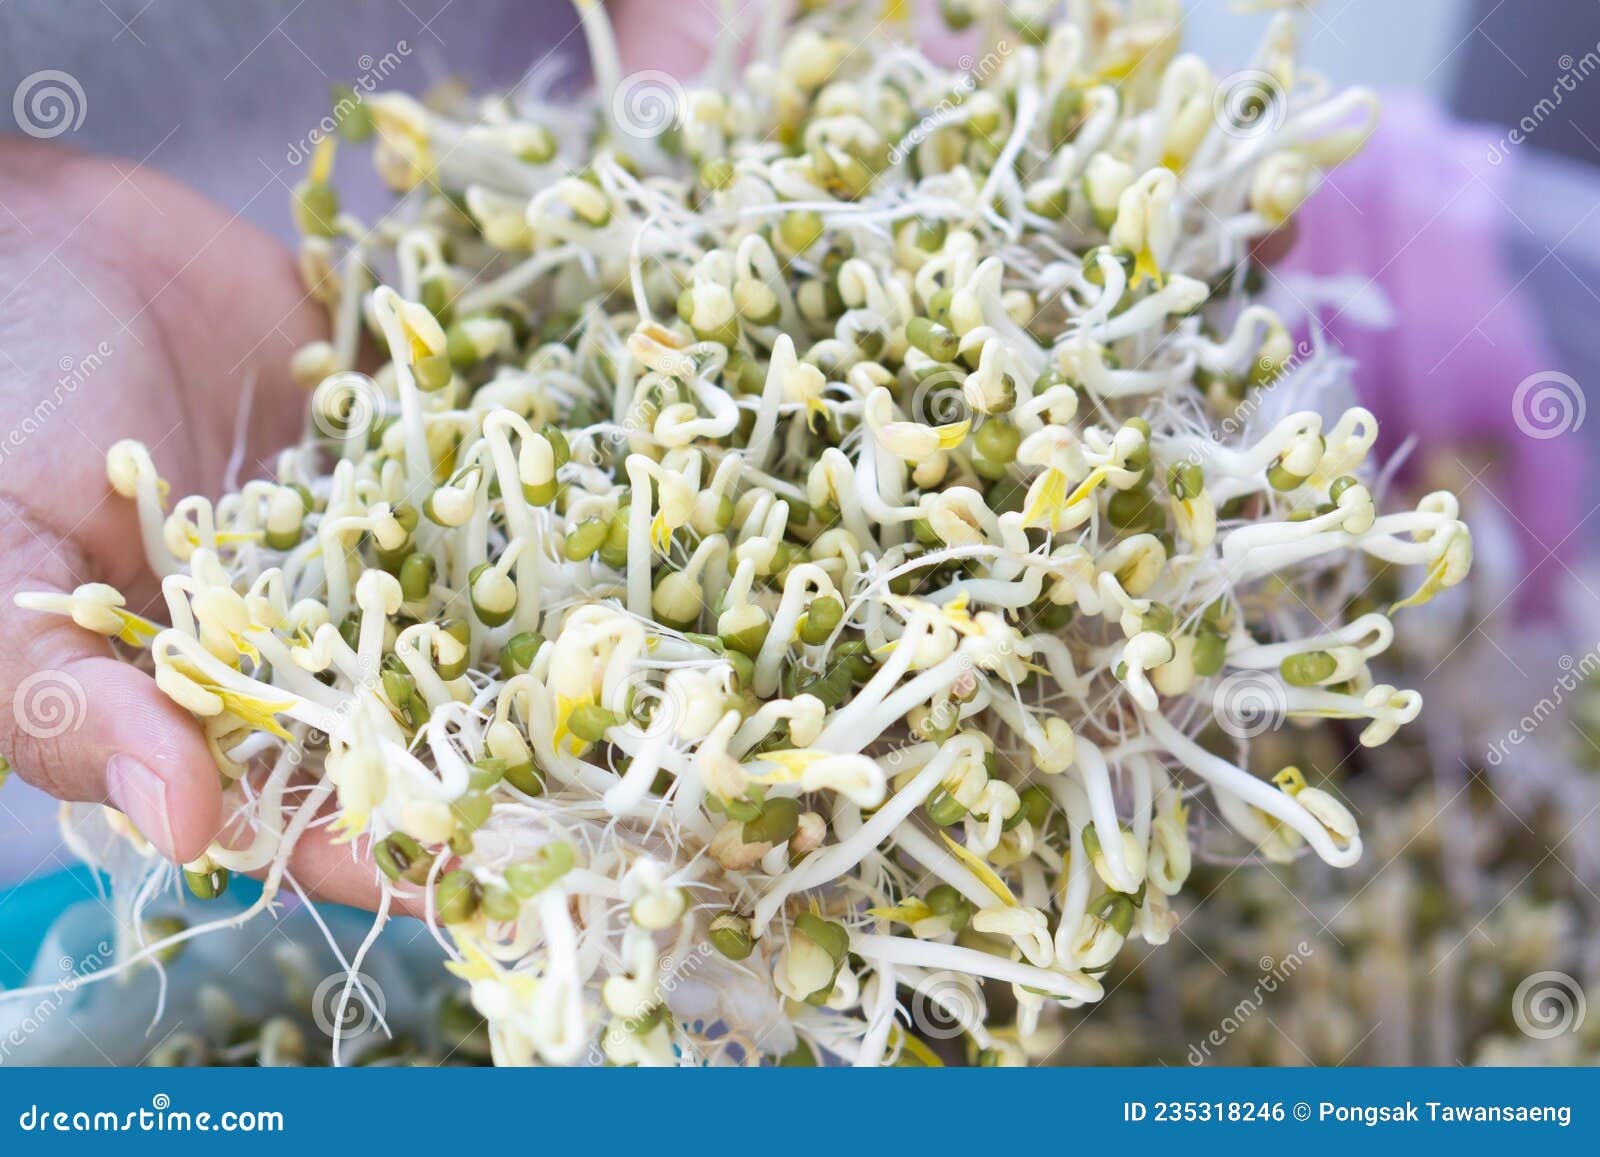 closeup hand holdingfresh bean sprouts with blured blackgroun, healthy food concept